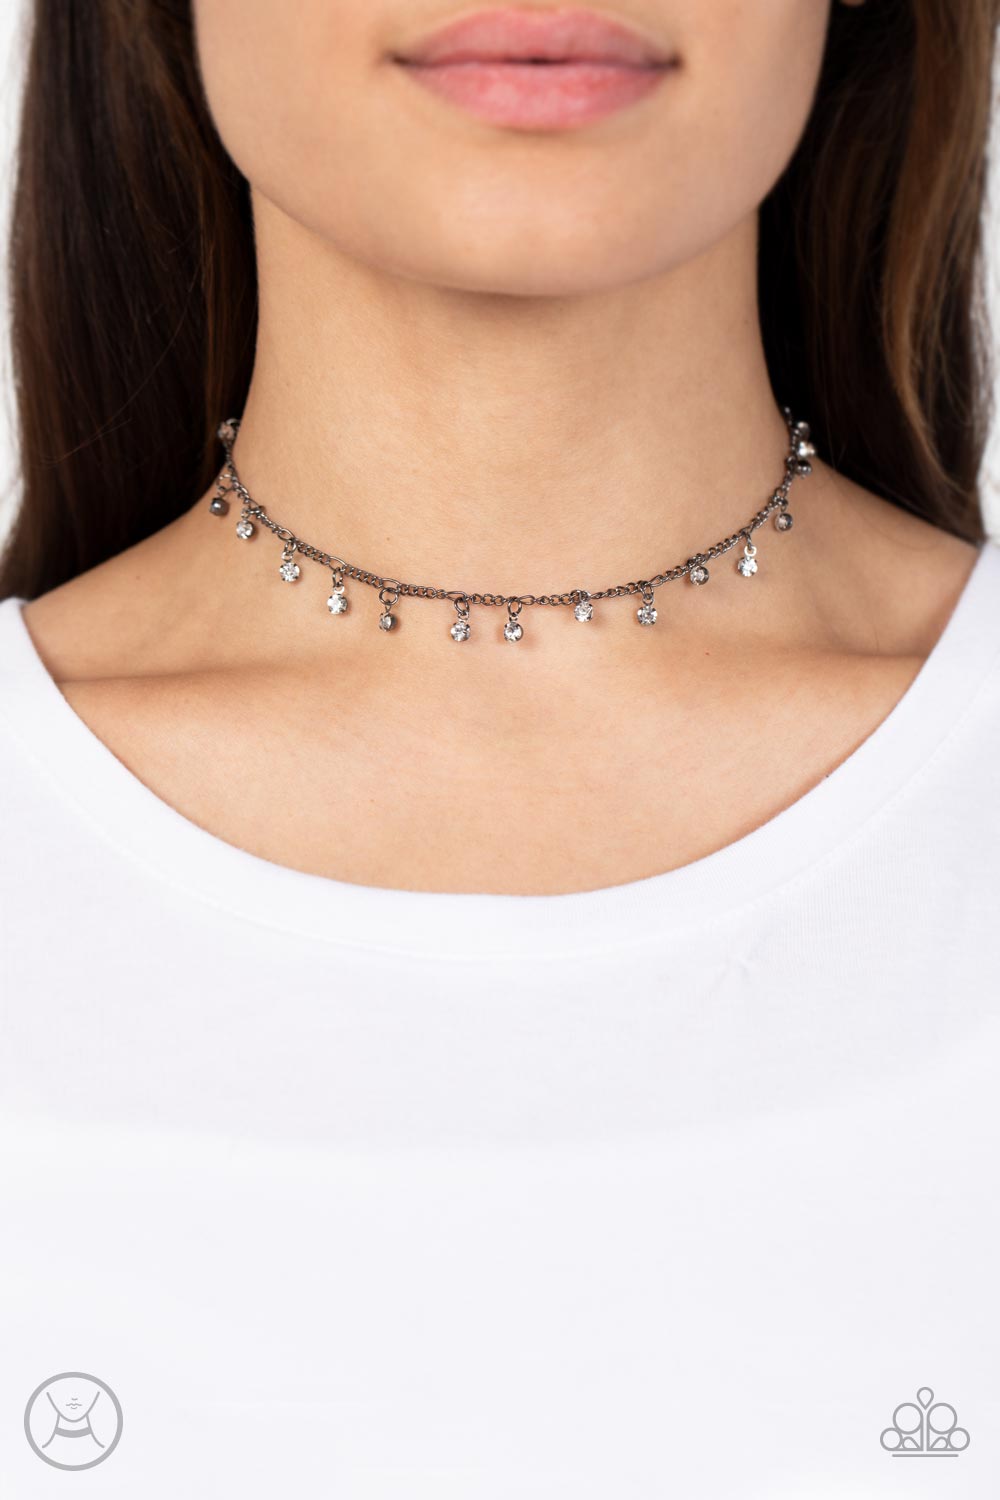 Encased in gritty gunmetal fittings, glassy white rhinestones dance from the bottom of a dainty gunmetal chain for a dash of spell-binding radiance around the neck.  Sold as one individual choker necklace. Includes one pair of matching earrings.